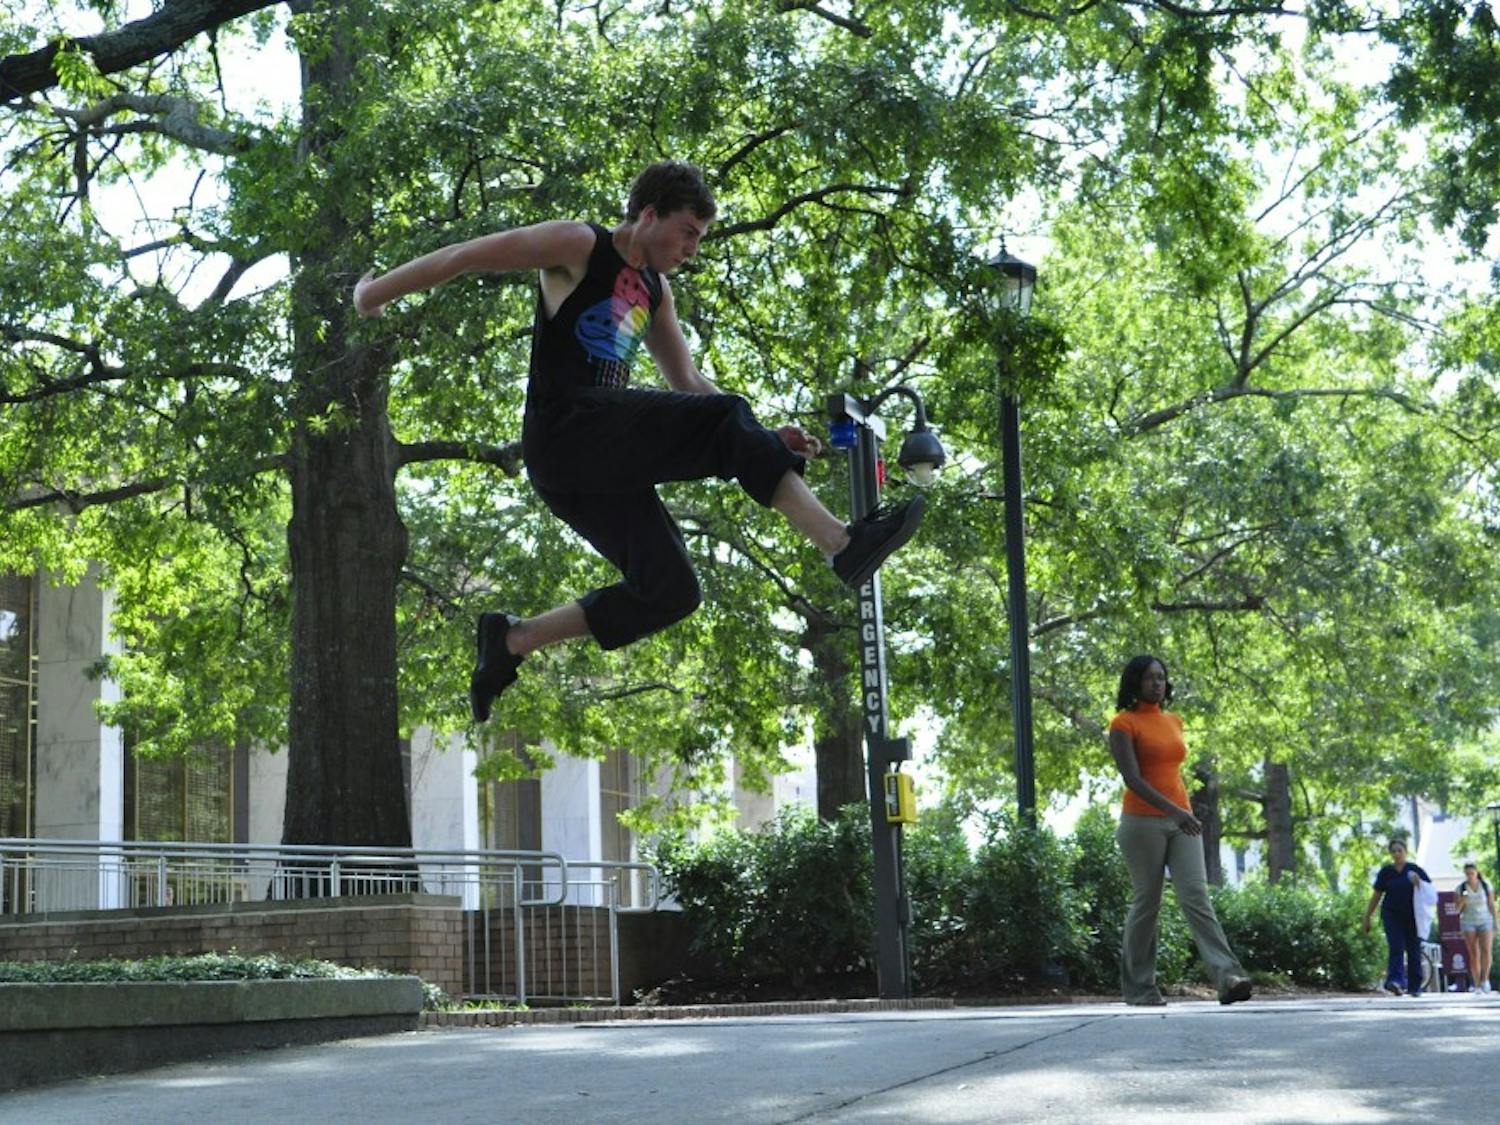 	A group of students and amateur free runners are working to start a parkour club on campus, called &#8220;Carolina Movement.&#8221; Members have been practicing parkour anywhere from 1 day to 2 years and some practice as much as 5 or 6 days a week.